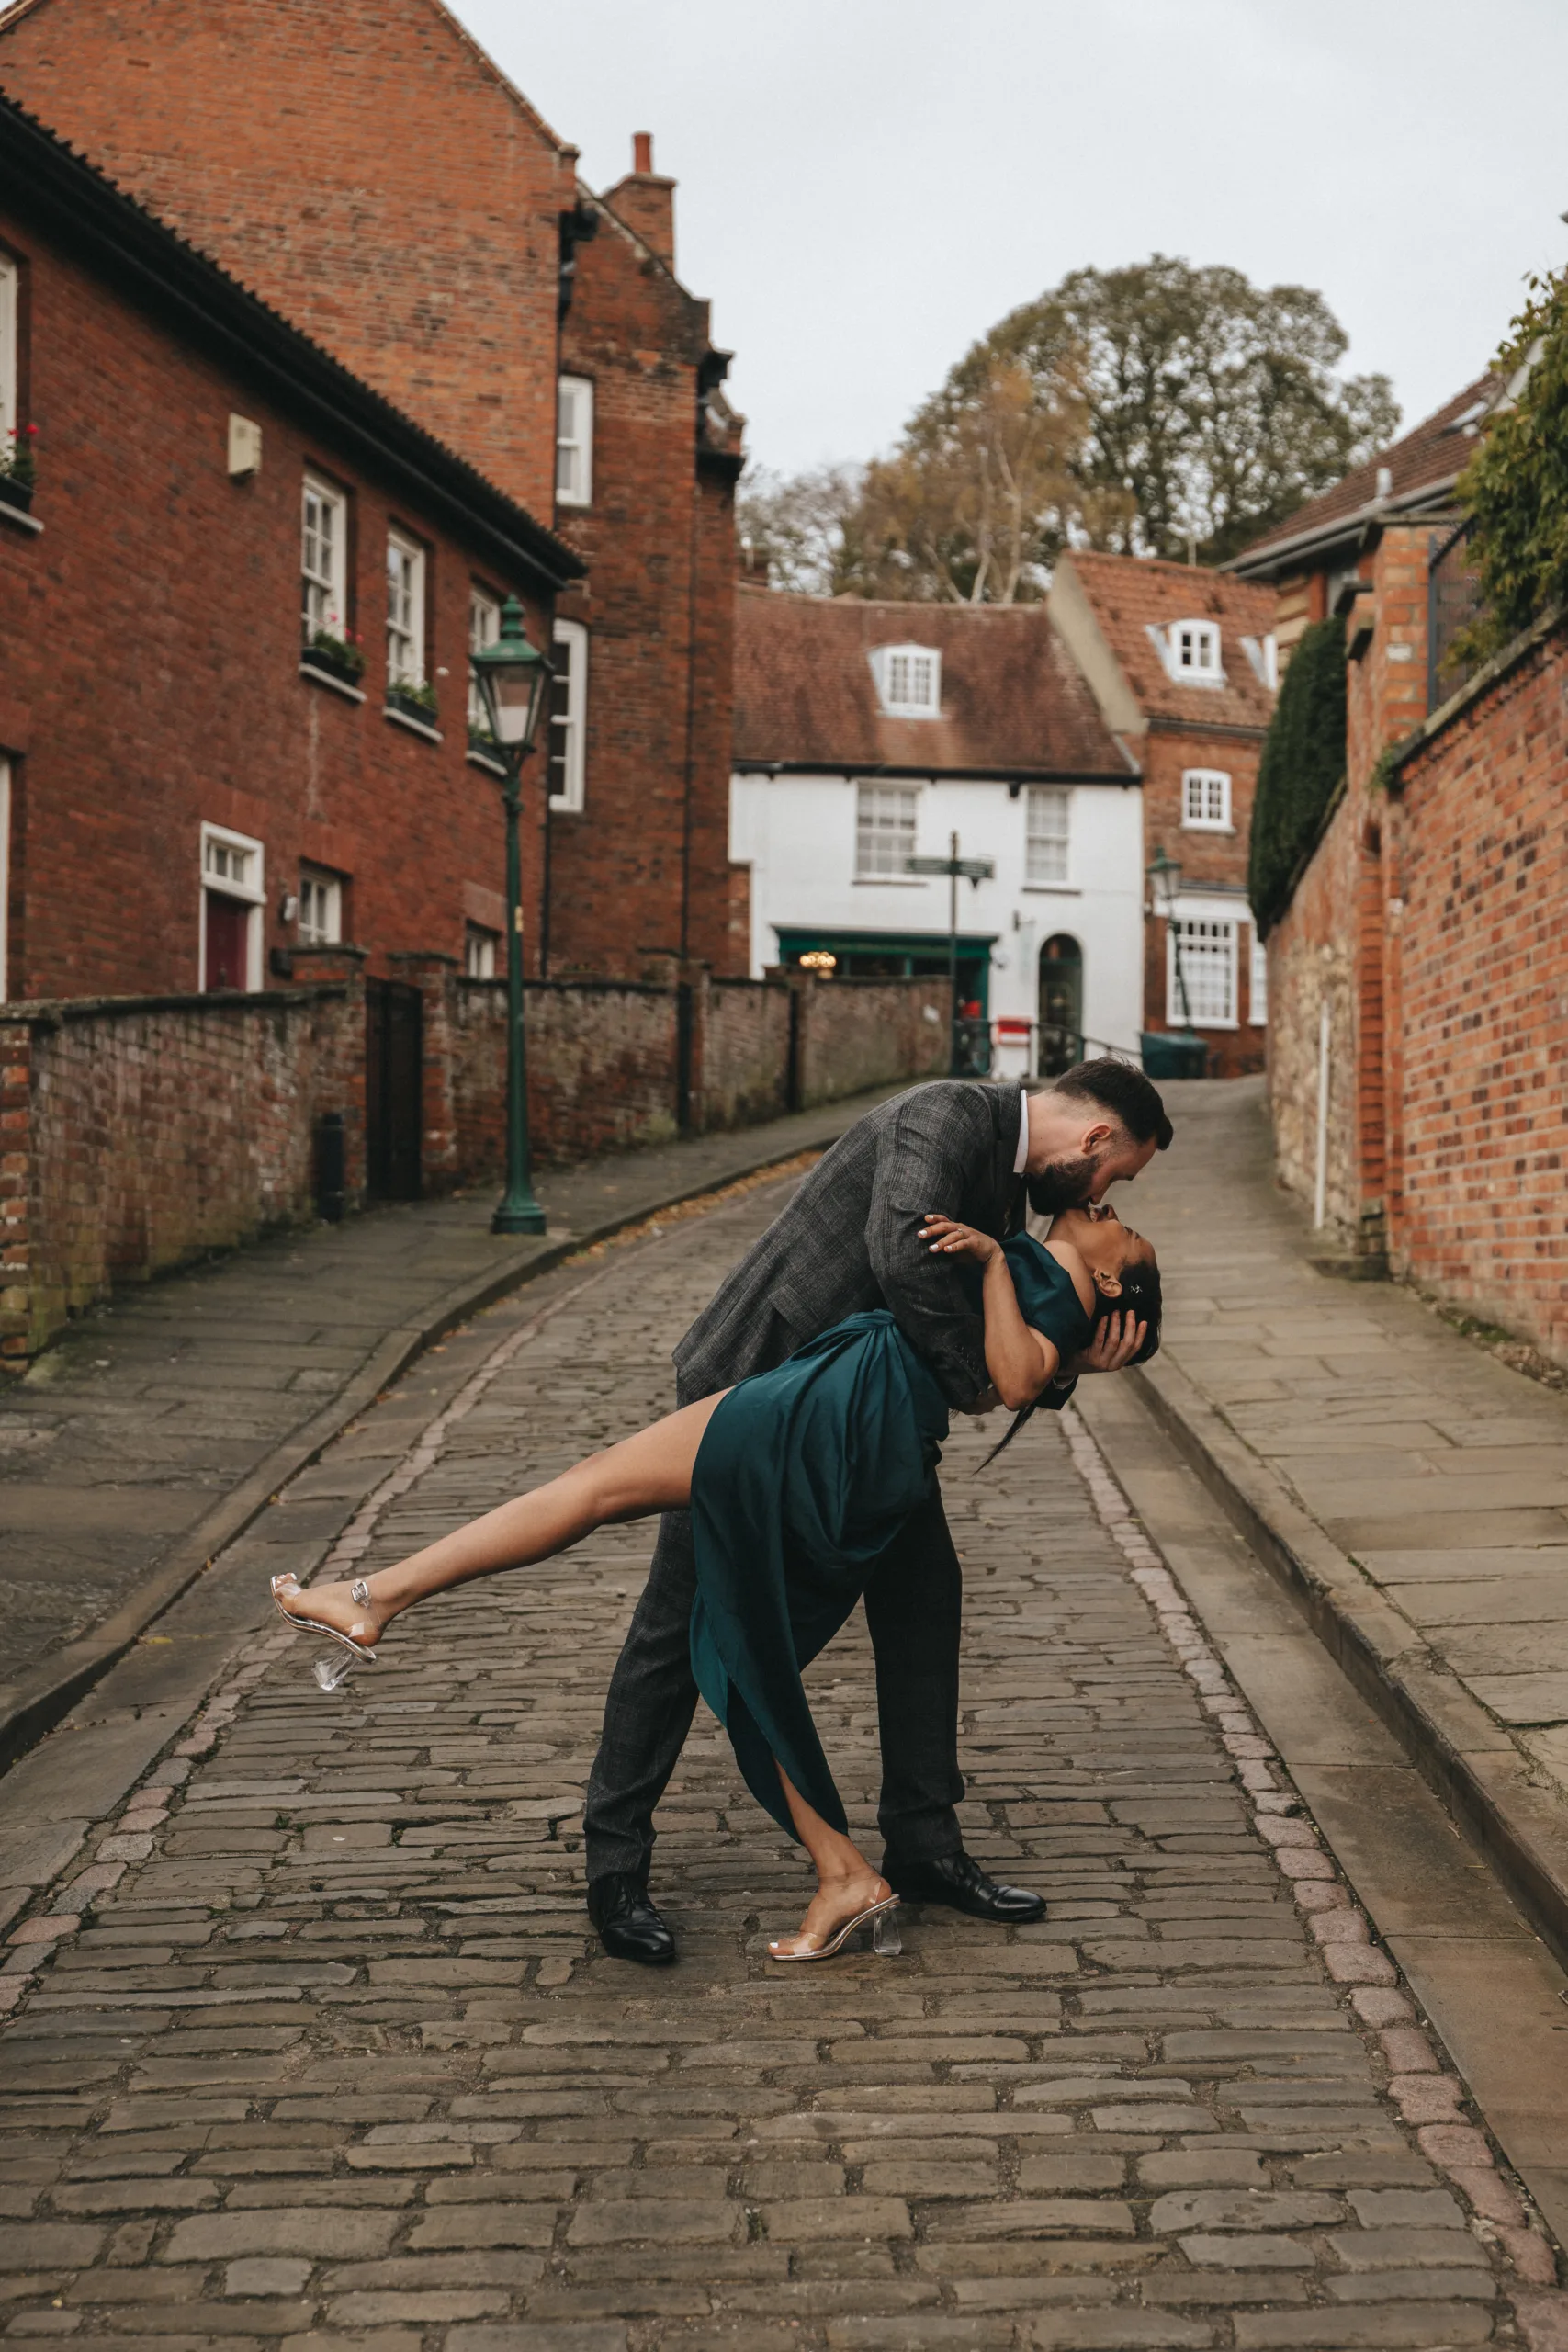 A couple kissing on a Yorkshire street, captured by a wedding photographer.